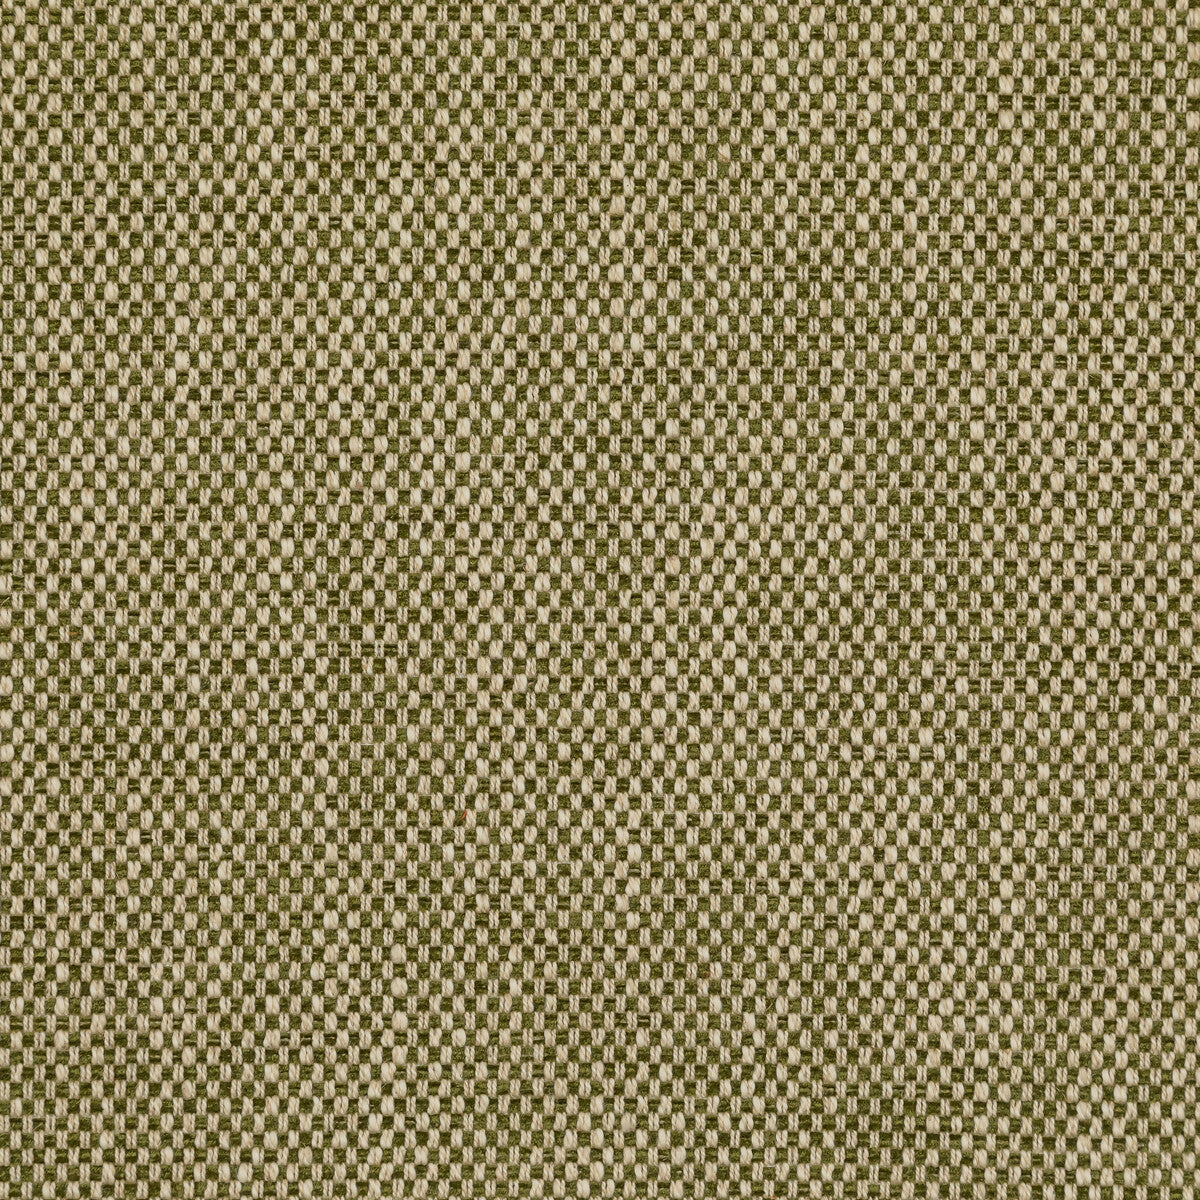 Carlton fabric in moss color - pattern BFC-3692.30.0 - by Lee Jofa in the Blithfield collection